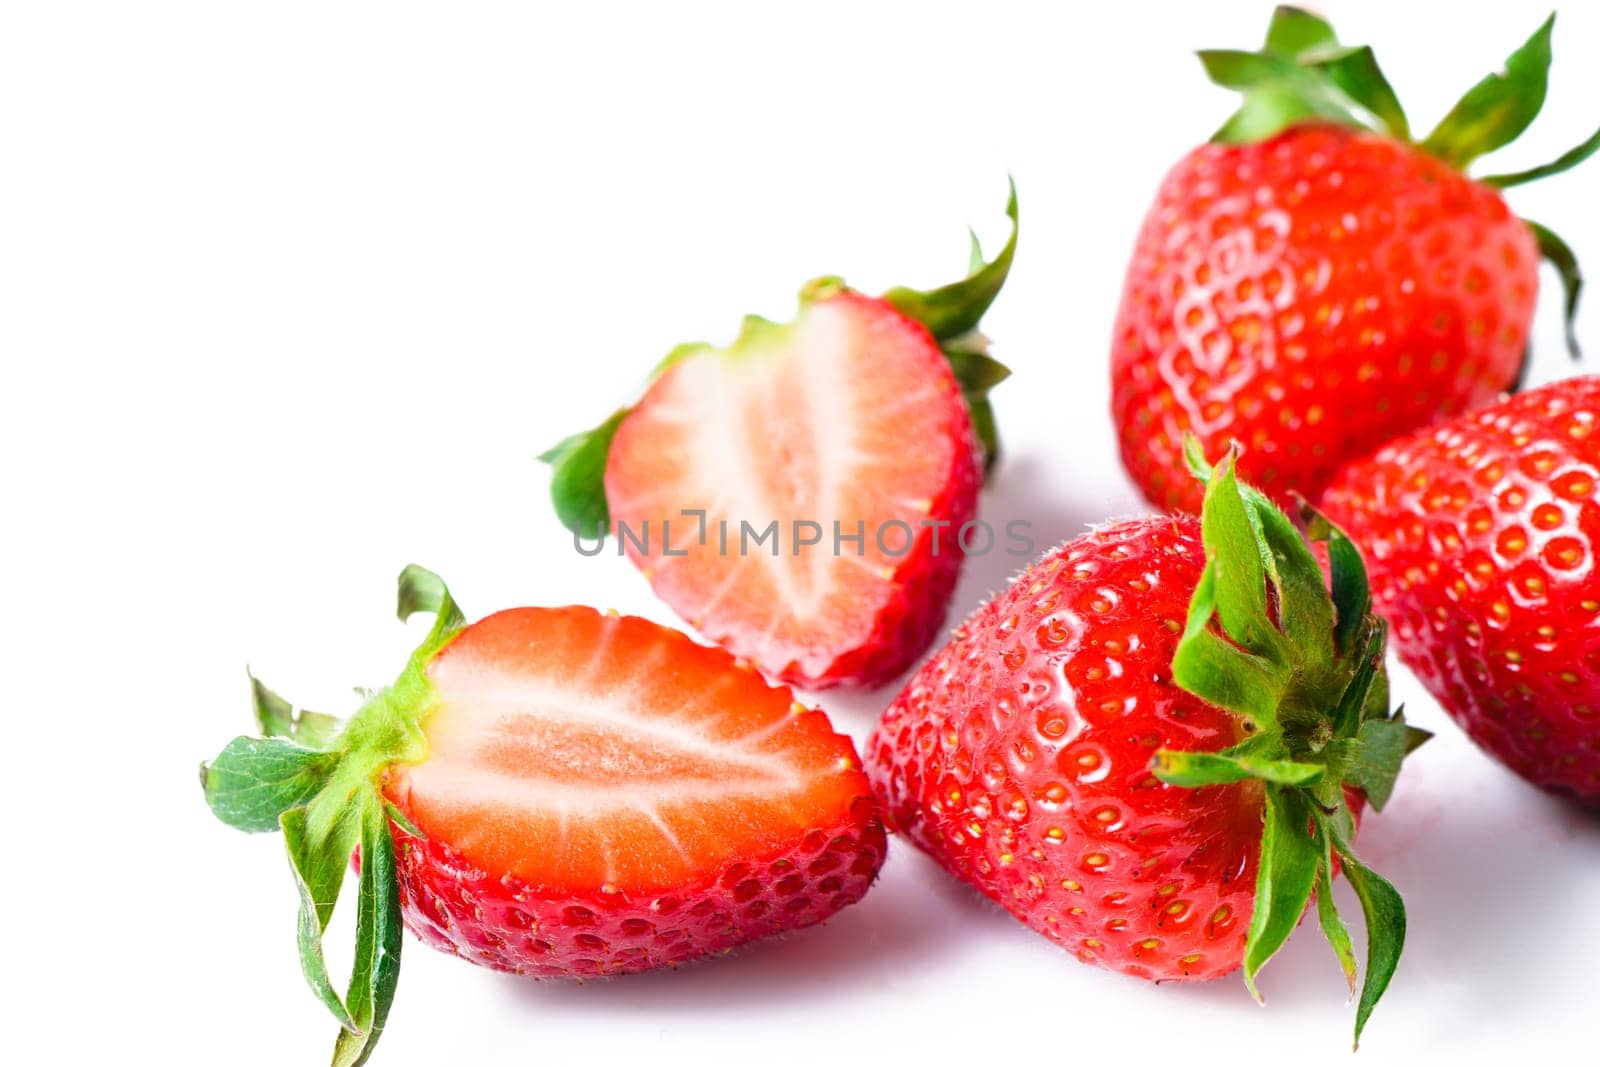 Group of Juicy Strawberry with half sliced isolated on white background.1